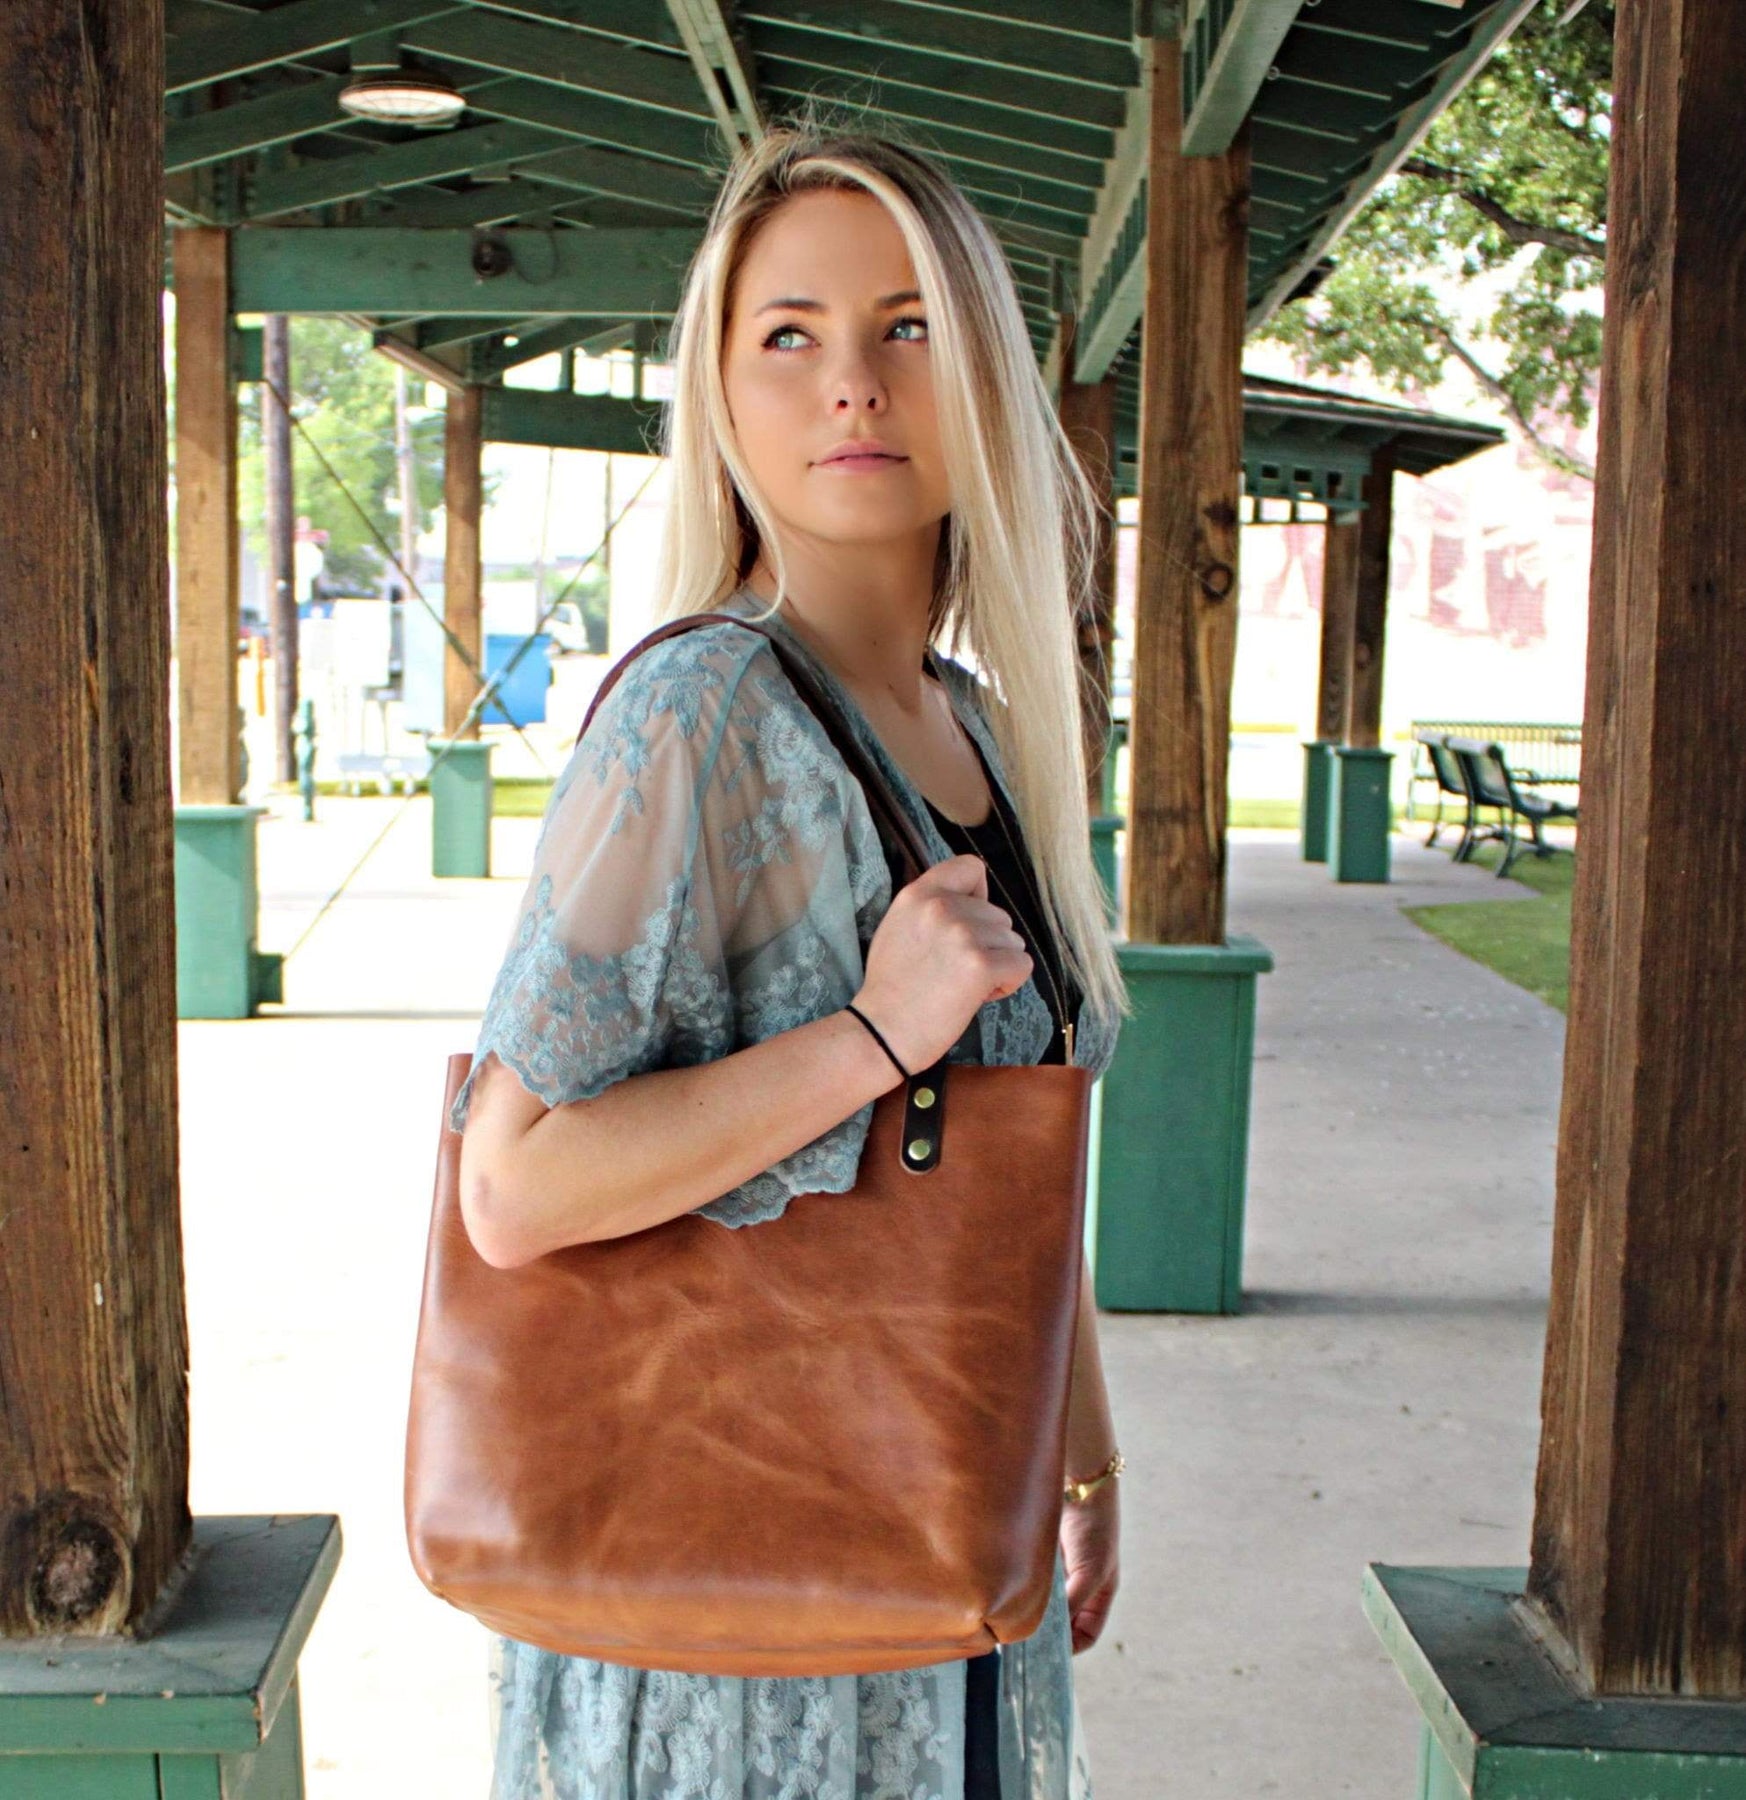 Kerry Noël Women's Leather Tote Bag